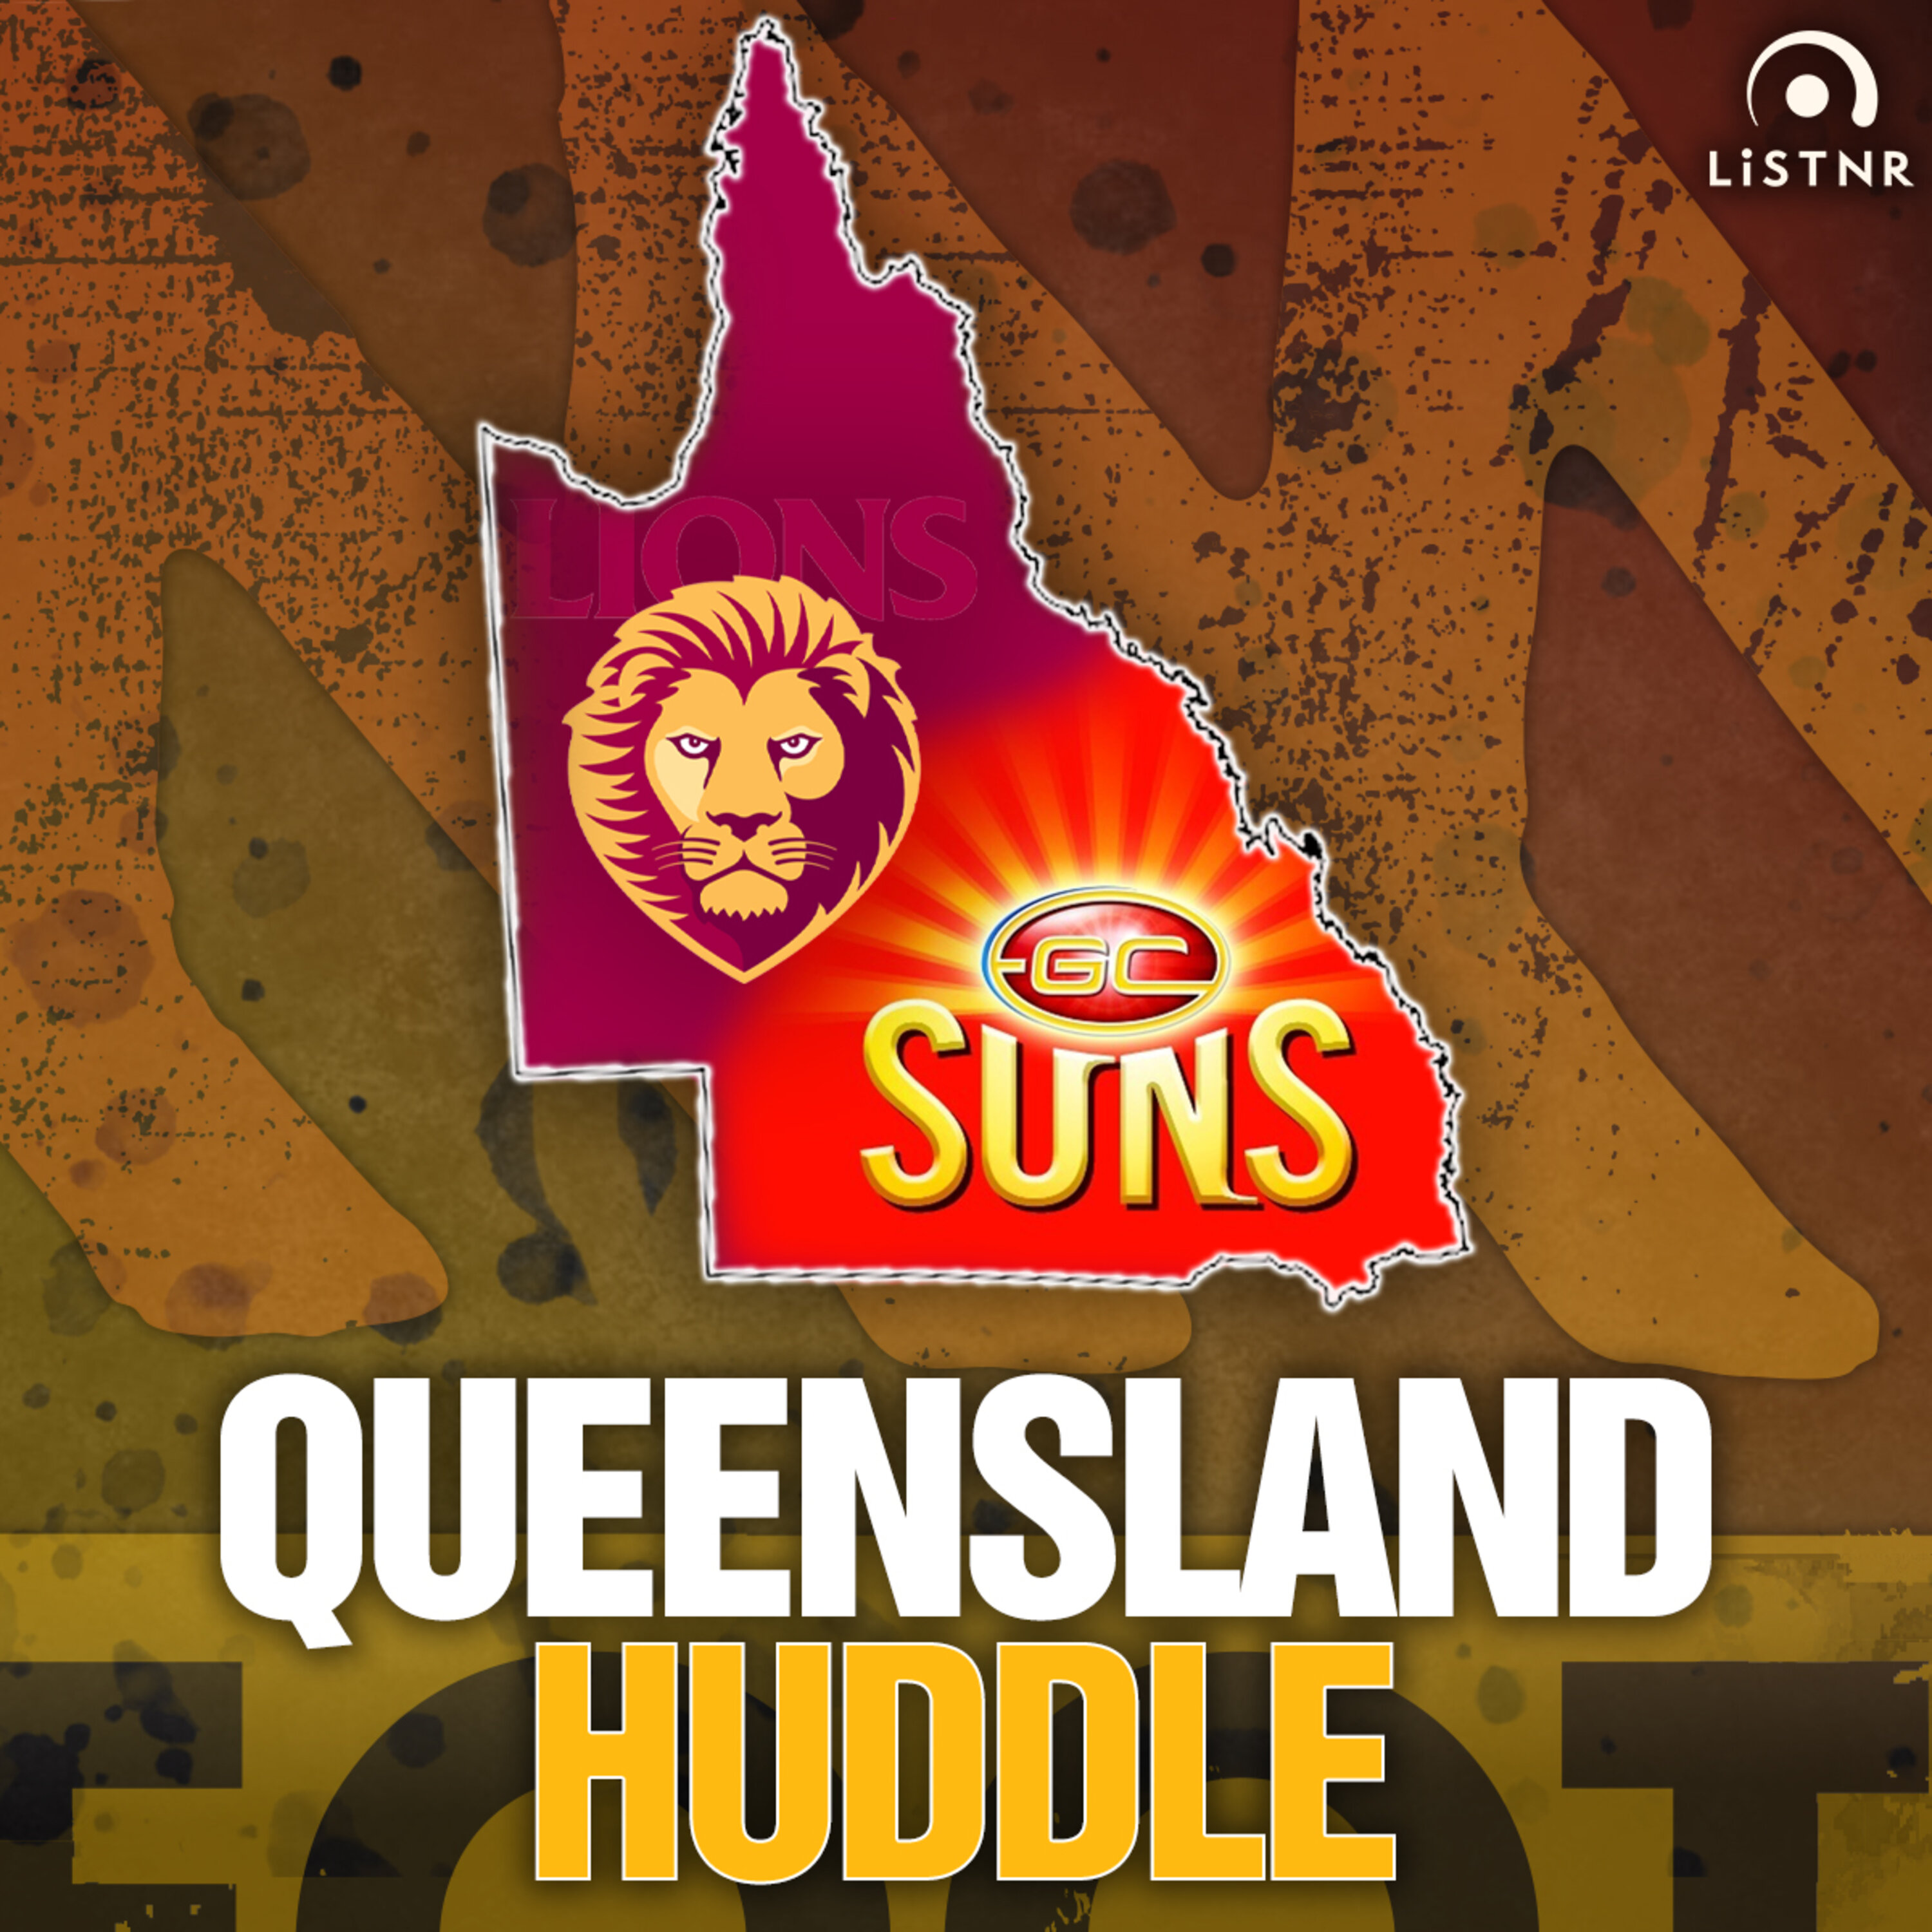 Queensland Huddle | Gold Coast's home away from home, the Suns' deja vu win over the Crows, will the Lions jump out of the blocks post bye?